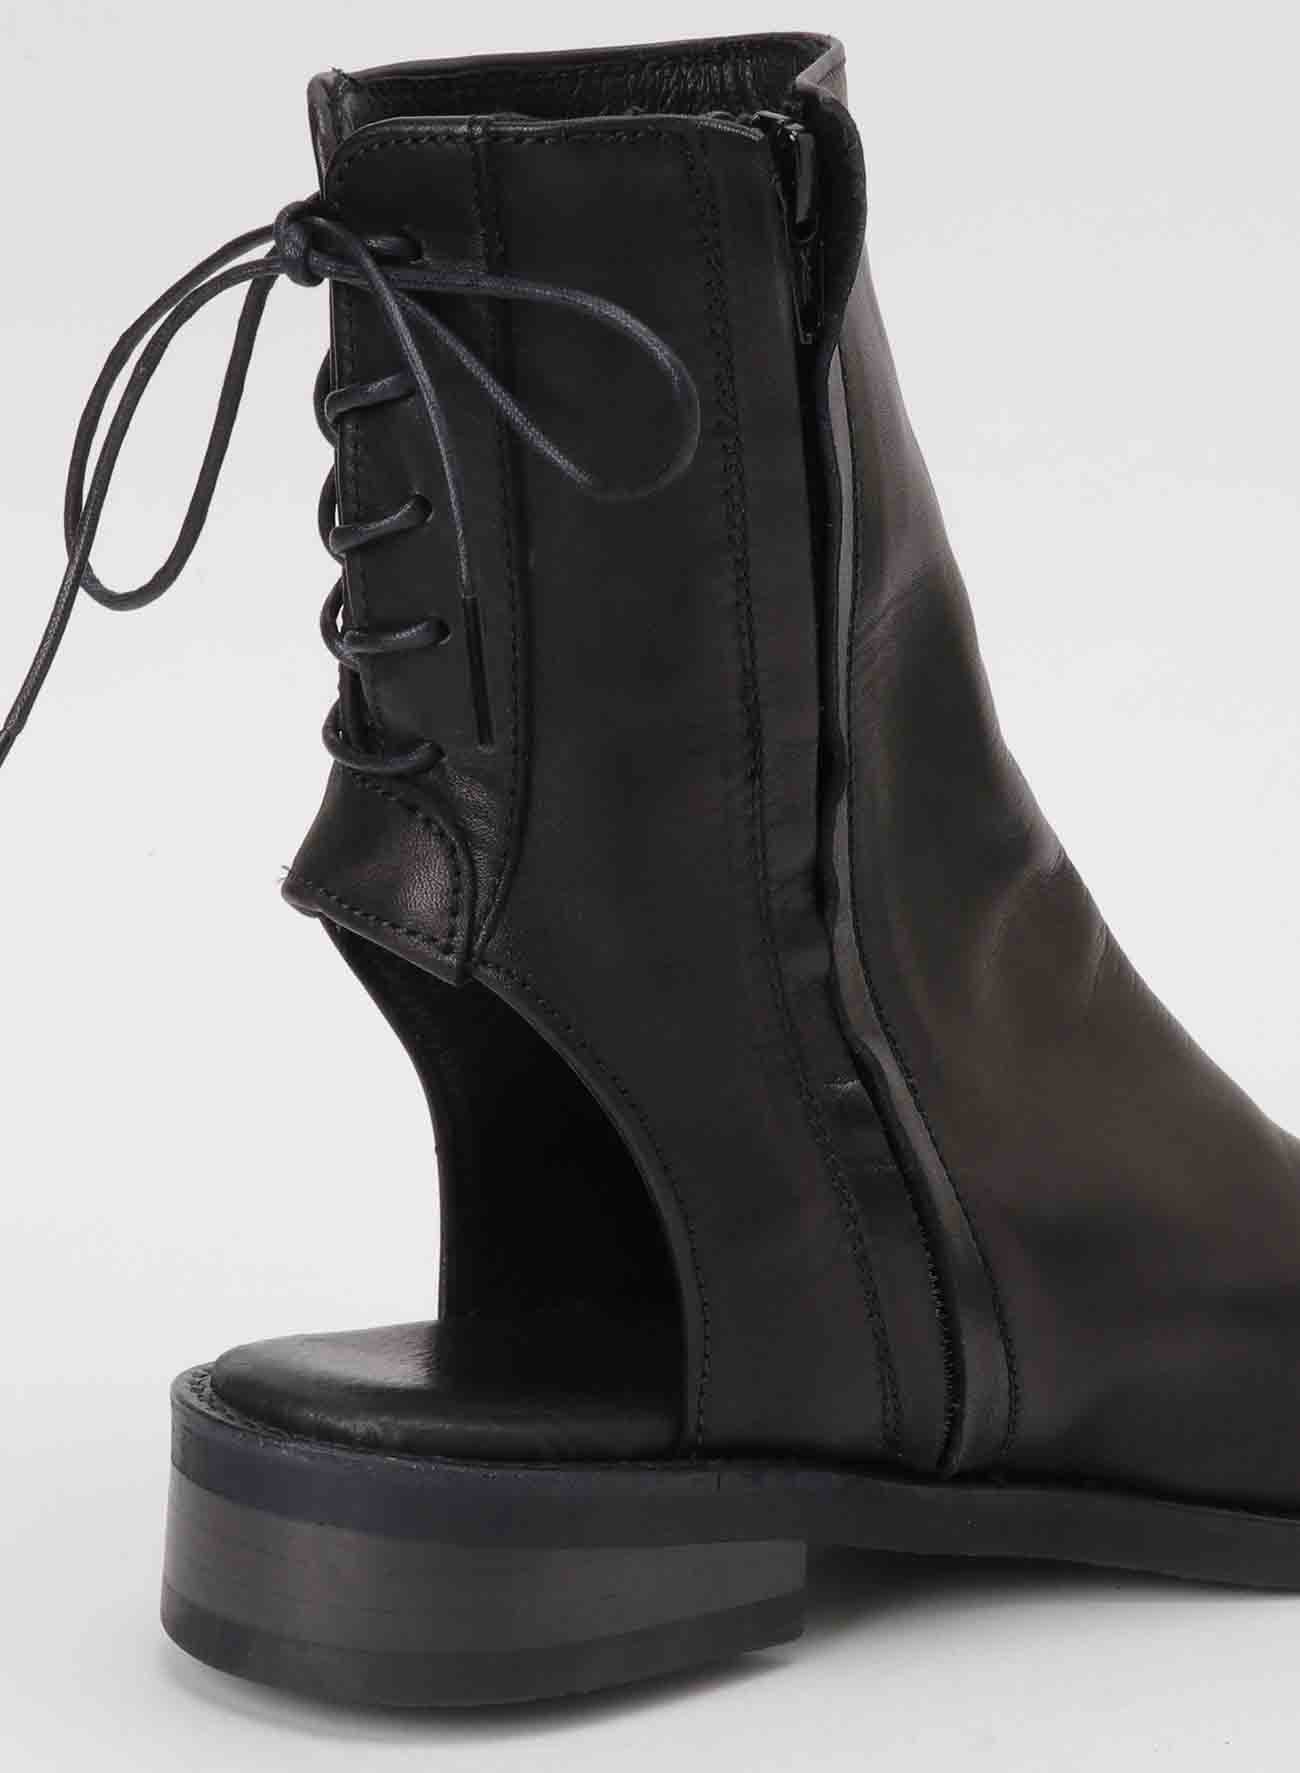 SOFT SMOOTH LEATHER OPEN TOE ONE HEEL BOOTS